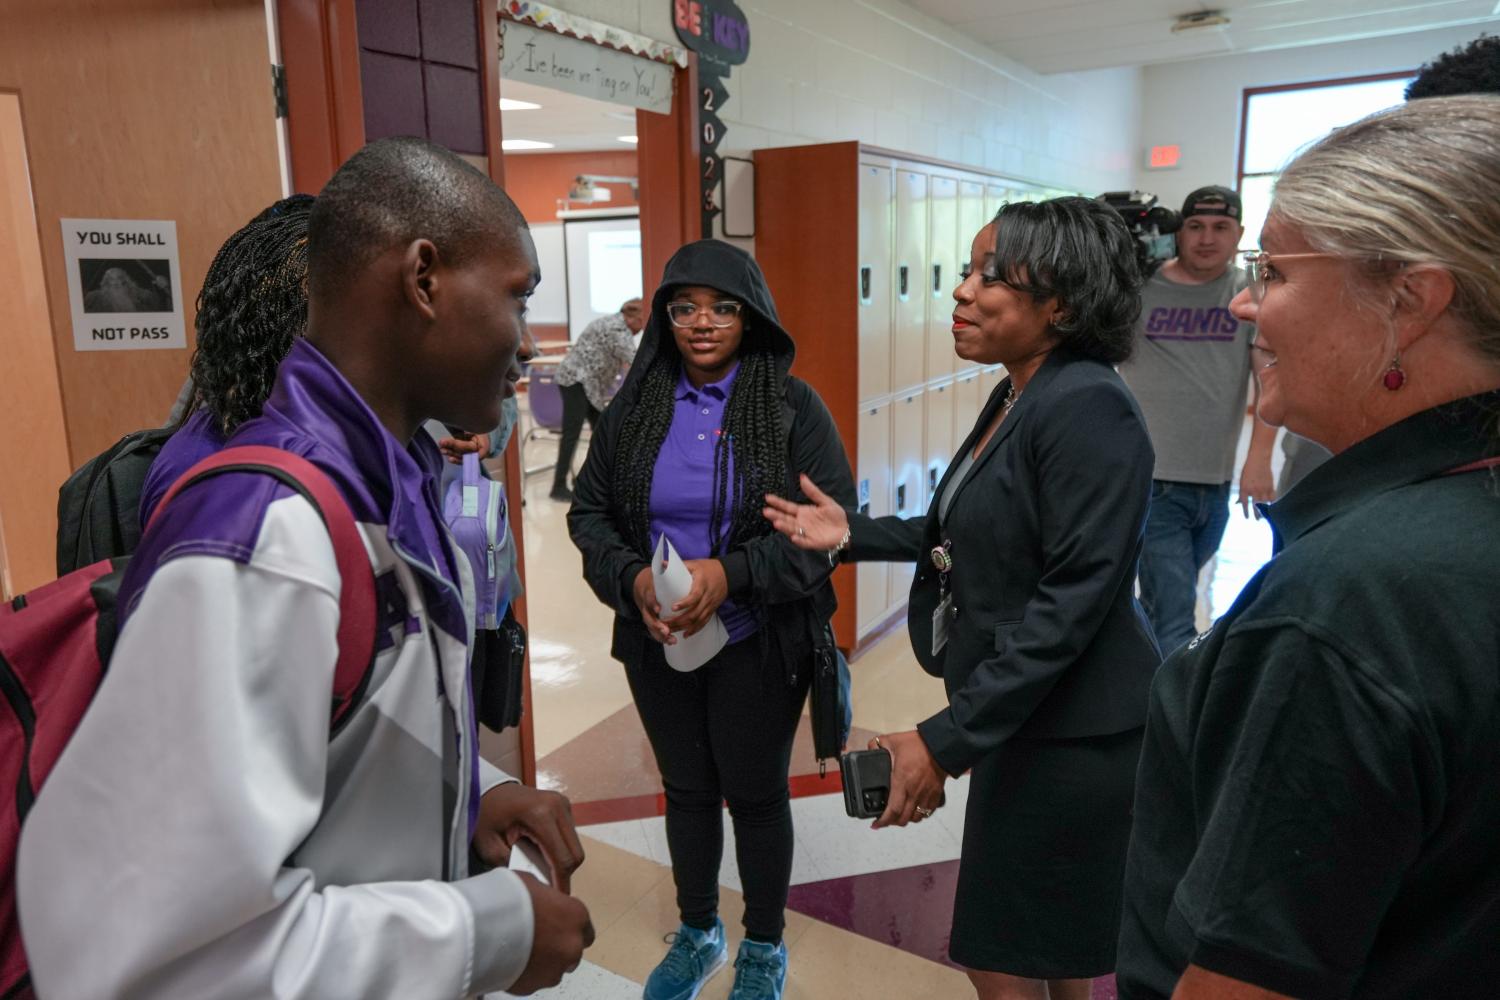 Cincinnati Public Schools Superintendant and CEO, Iranetta Rayborn Wright tours Aiken High School on the first day of school on Thursday August 18, 2022. Wright walked around, greeting students and staff and taking selfies with them.